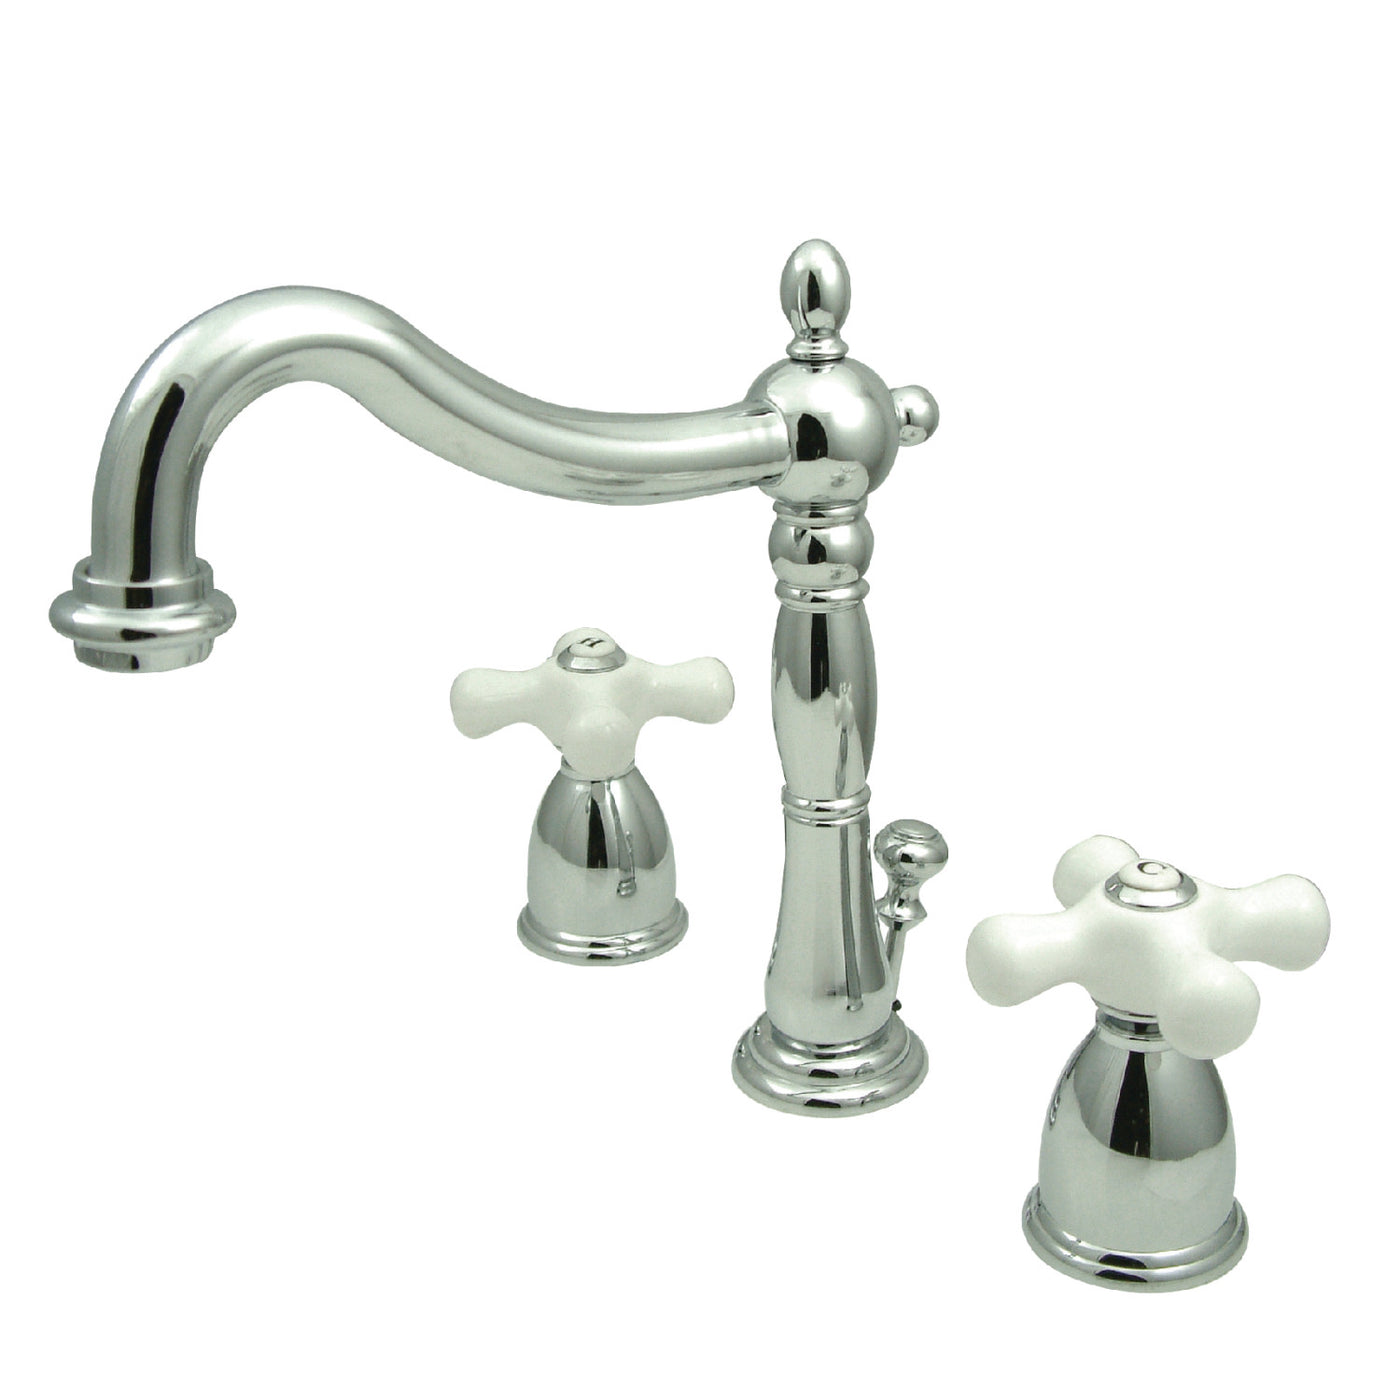 Elements of Design EB1971PX Widespread Bathroom Faucet with Plastic Pop-Up, Polished Chrome